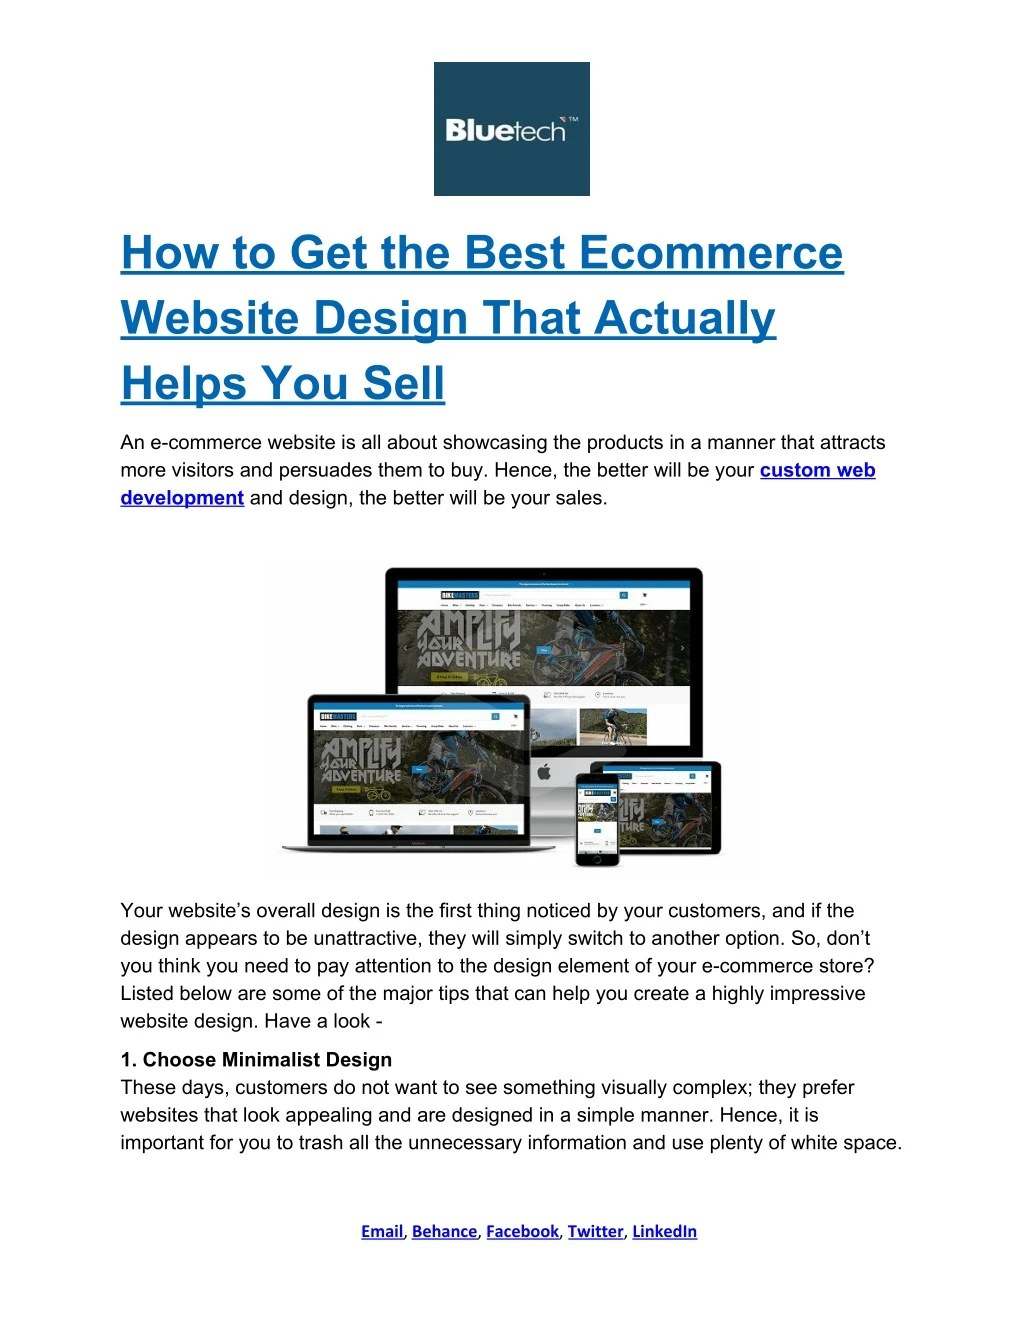 how to get the best ecommerce website design that